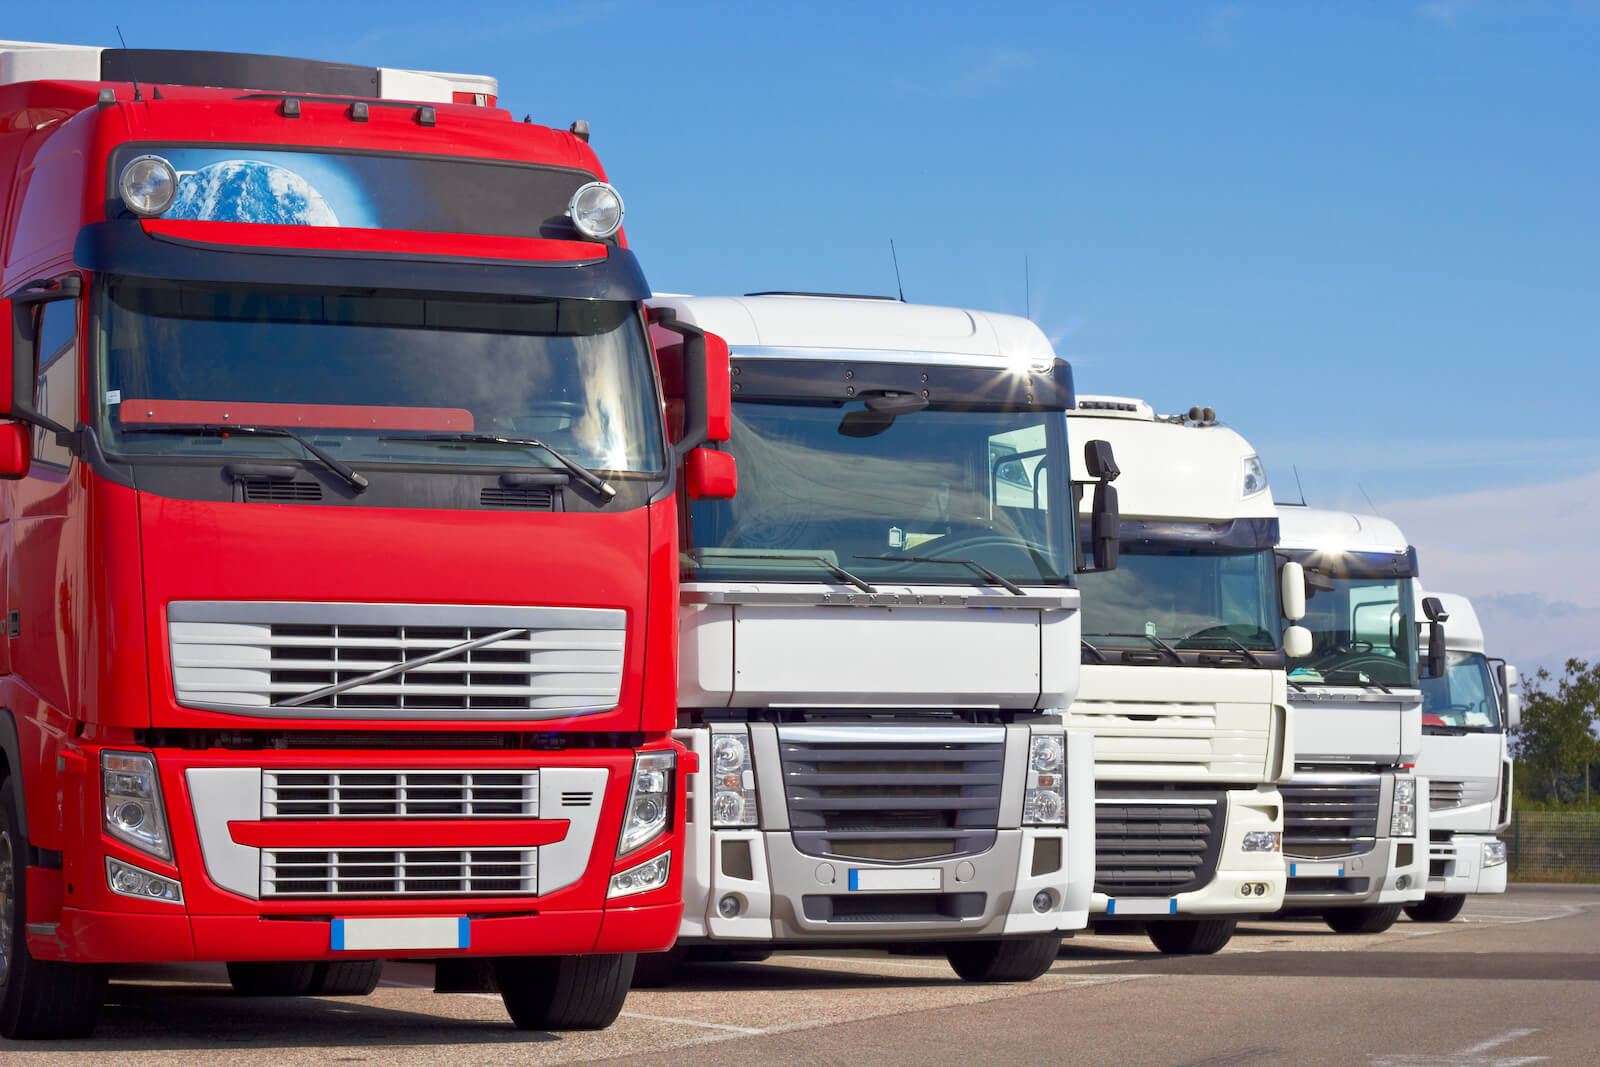 HGV Levy Coming in 2023 - Medical